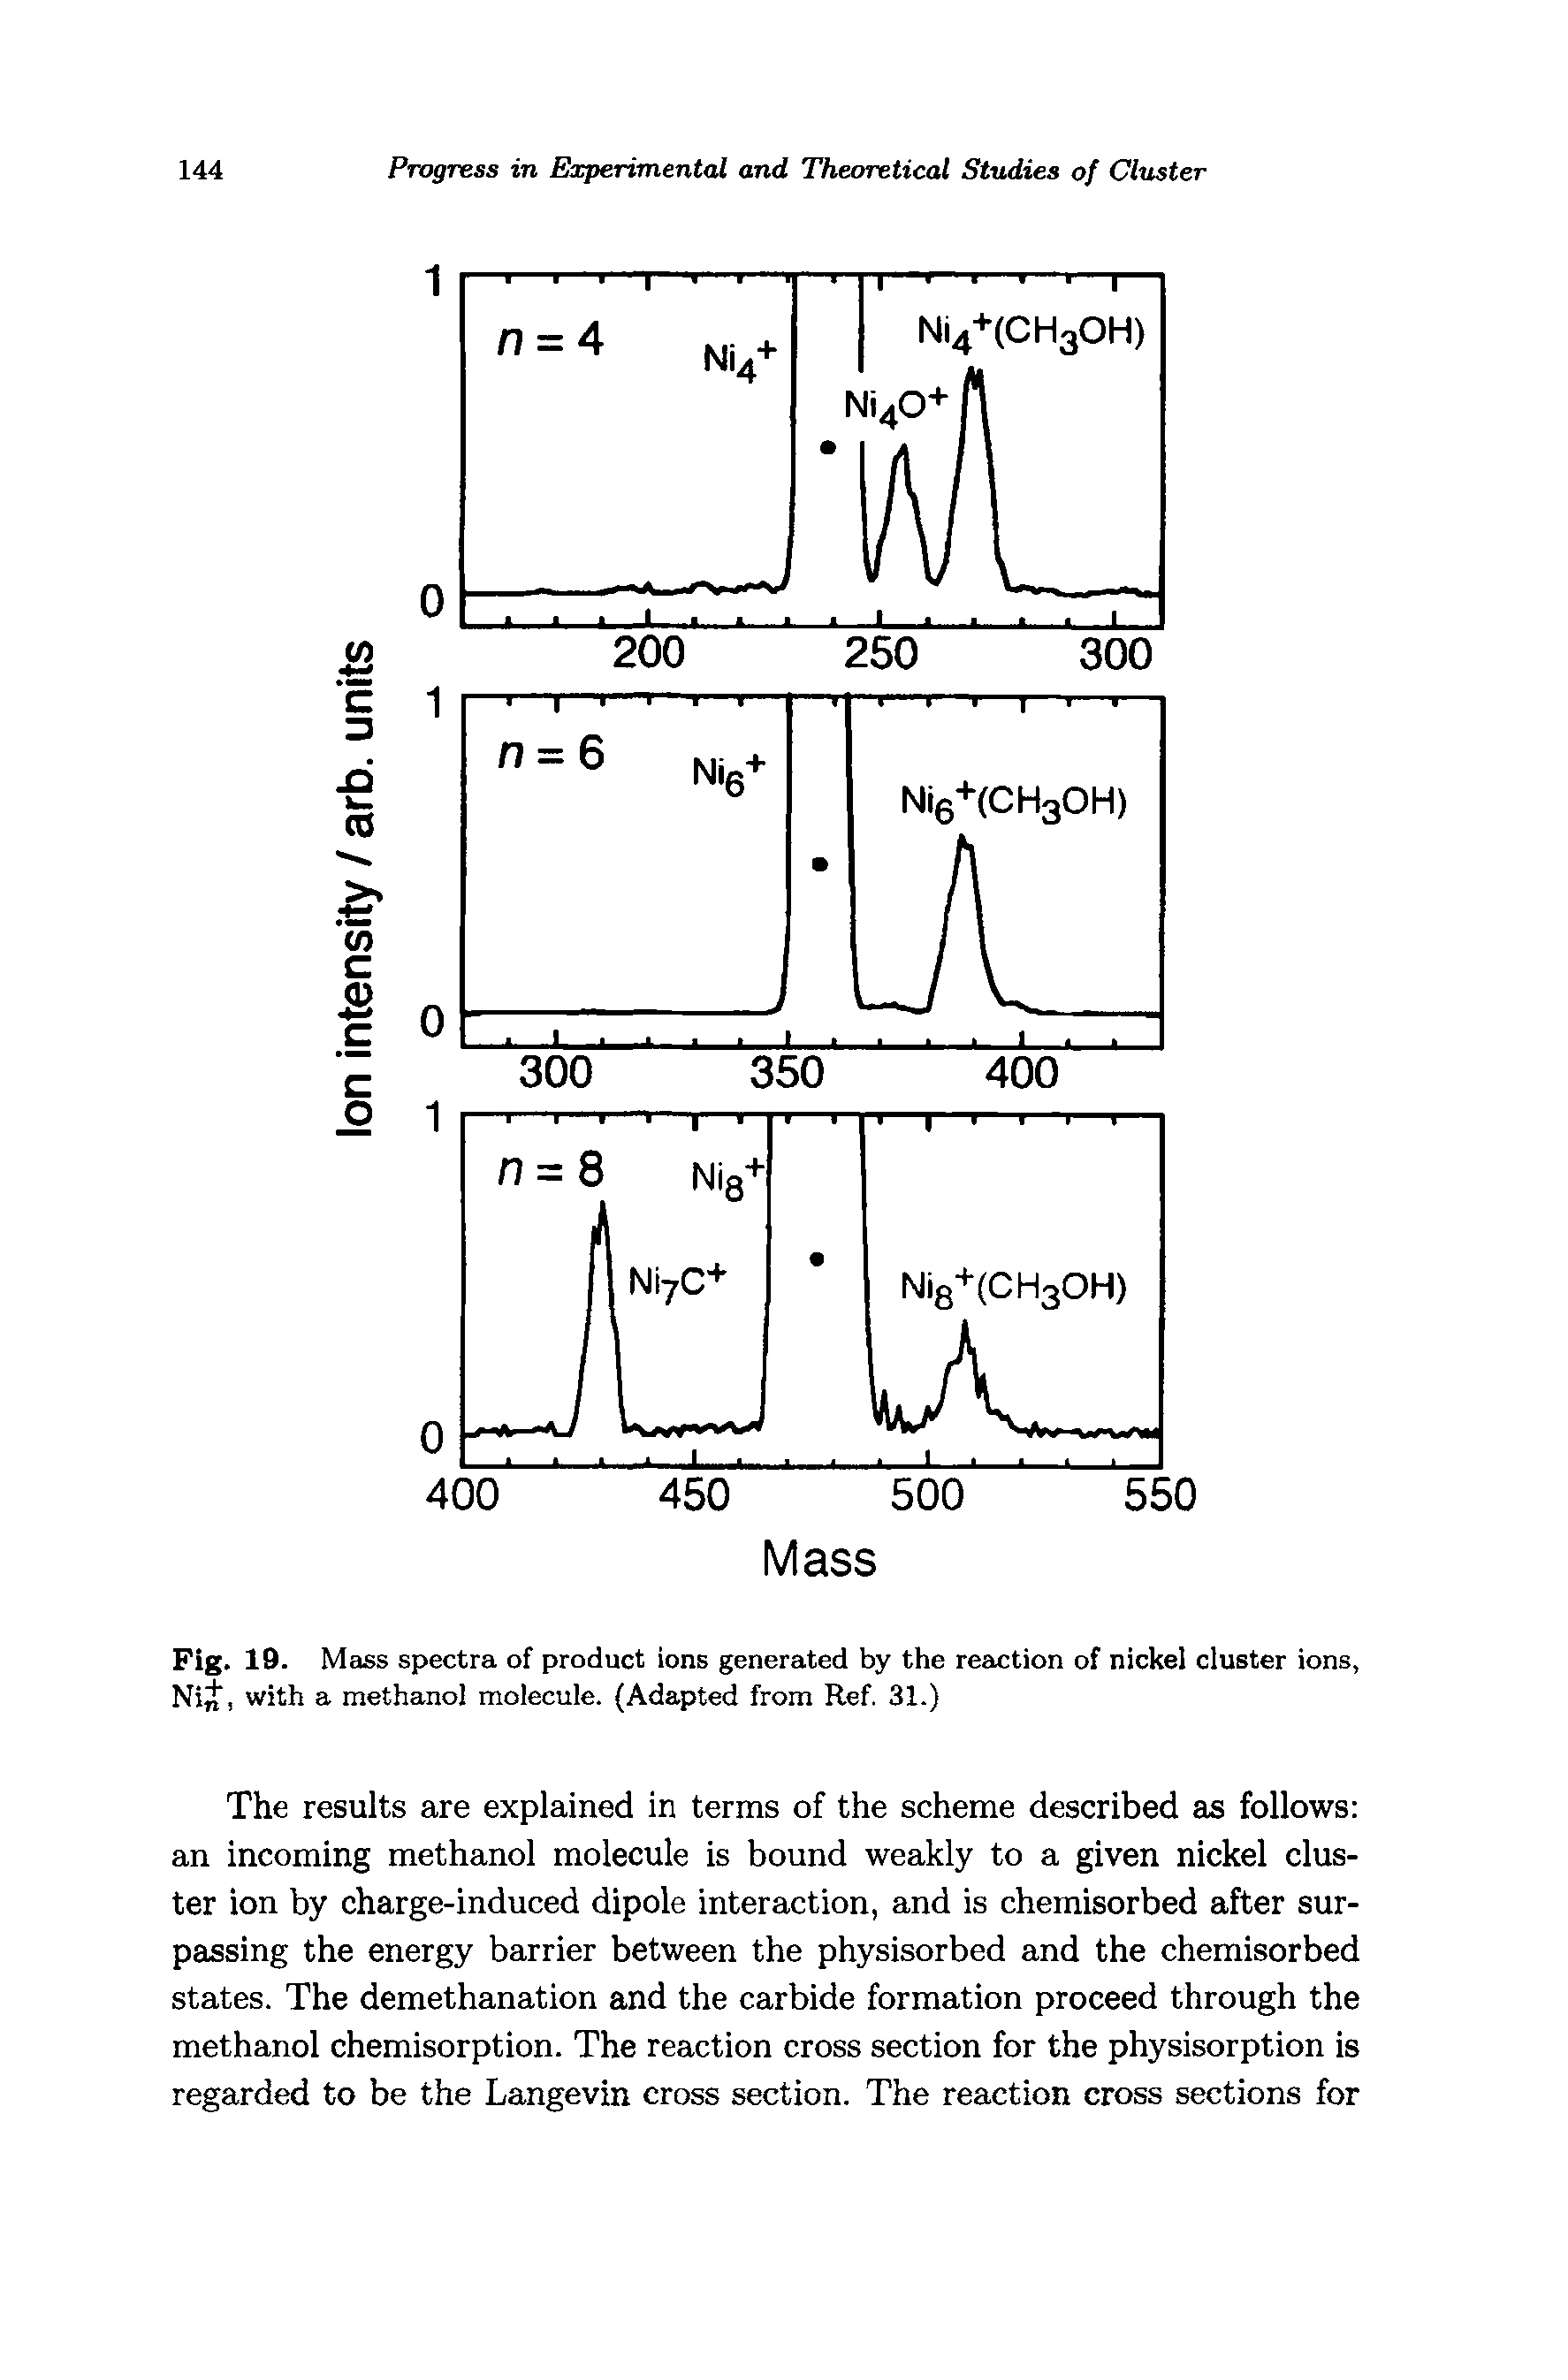 Fig. 19. Mass spectra of product ions generated by the reaction of nickel cluster ions, Nin, with a methanol molecule. Adapted from Ref. 31.)...